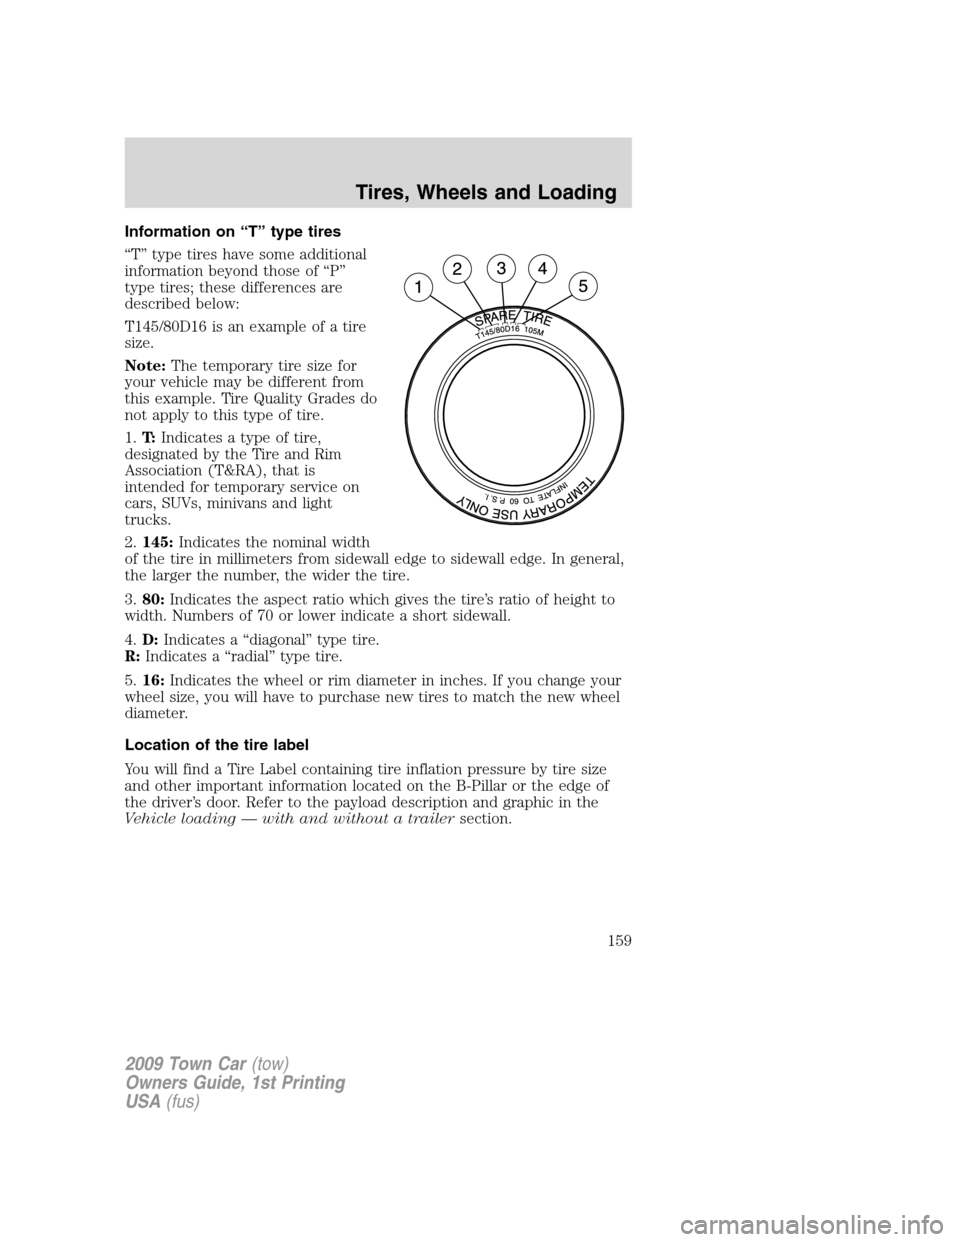 LINCOLN TOWN CAR 2009  Owners Manual Information on “T” type tires
“T” type tires have some additional
information beyond those of “P”
type tires; these differences are
described below:
T145/80D16 is an example of a tire
size